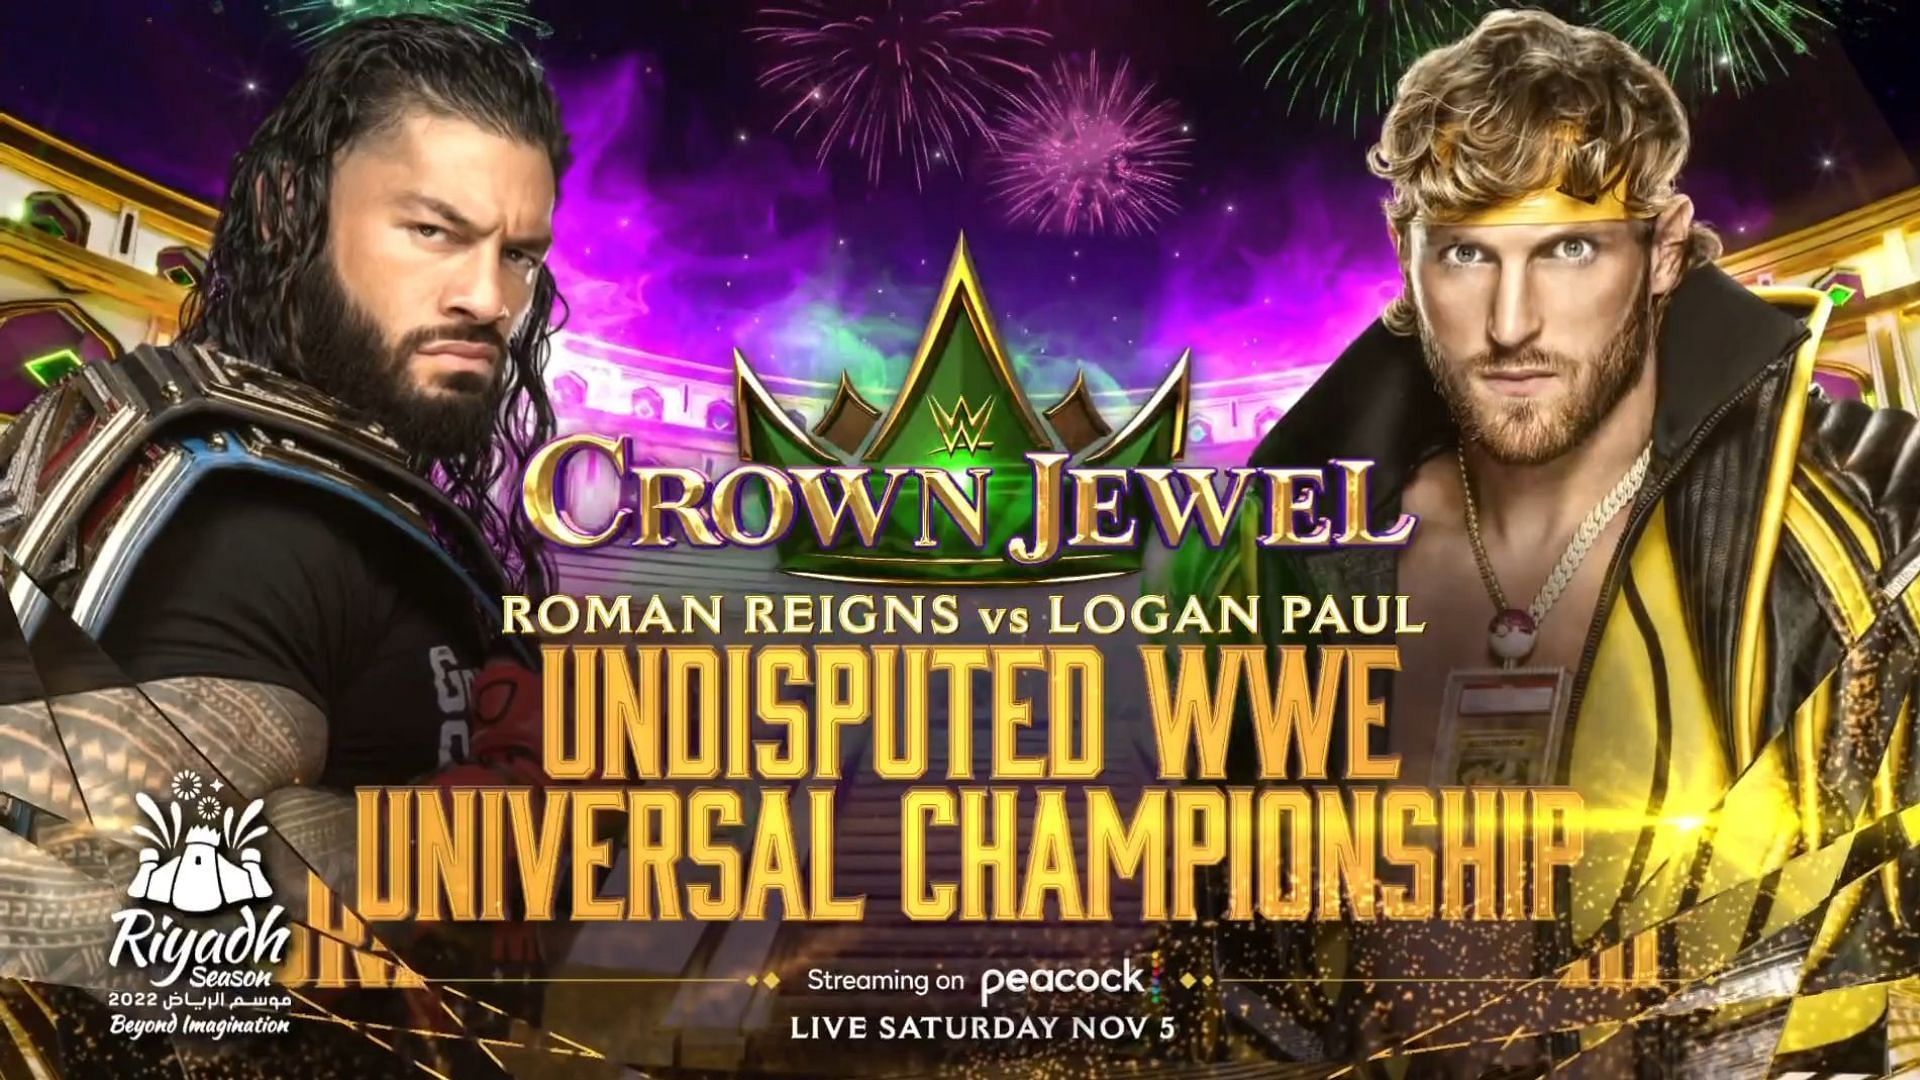 WWE Crown Jewel is scheduled for this Saturday in Saudi Arabia